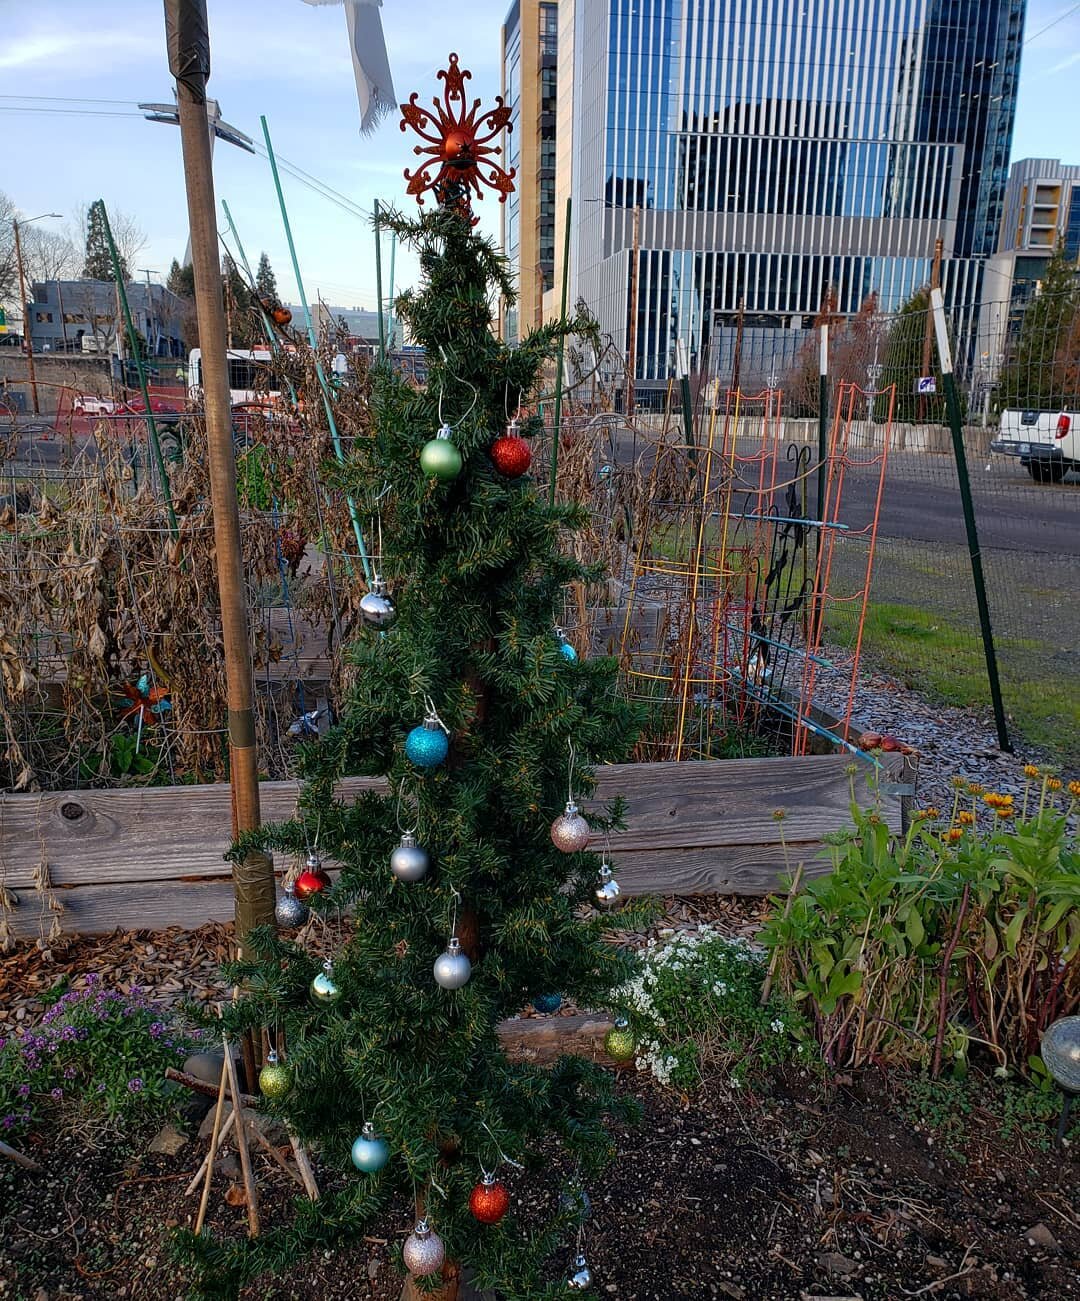 It's beginning to look a lot like Christmas 🎄in the South Waterfront Community Garden! If you'd like to learn more about the availability of garden beds for the 2020 season, reach out to Community Garden Manager Pete Collins at pete@southwaterfront.